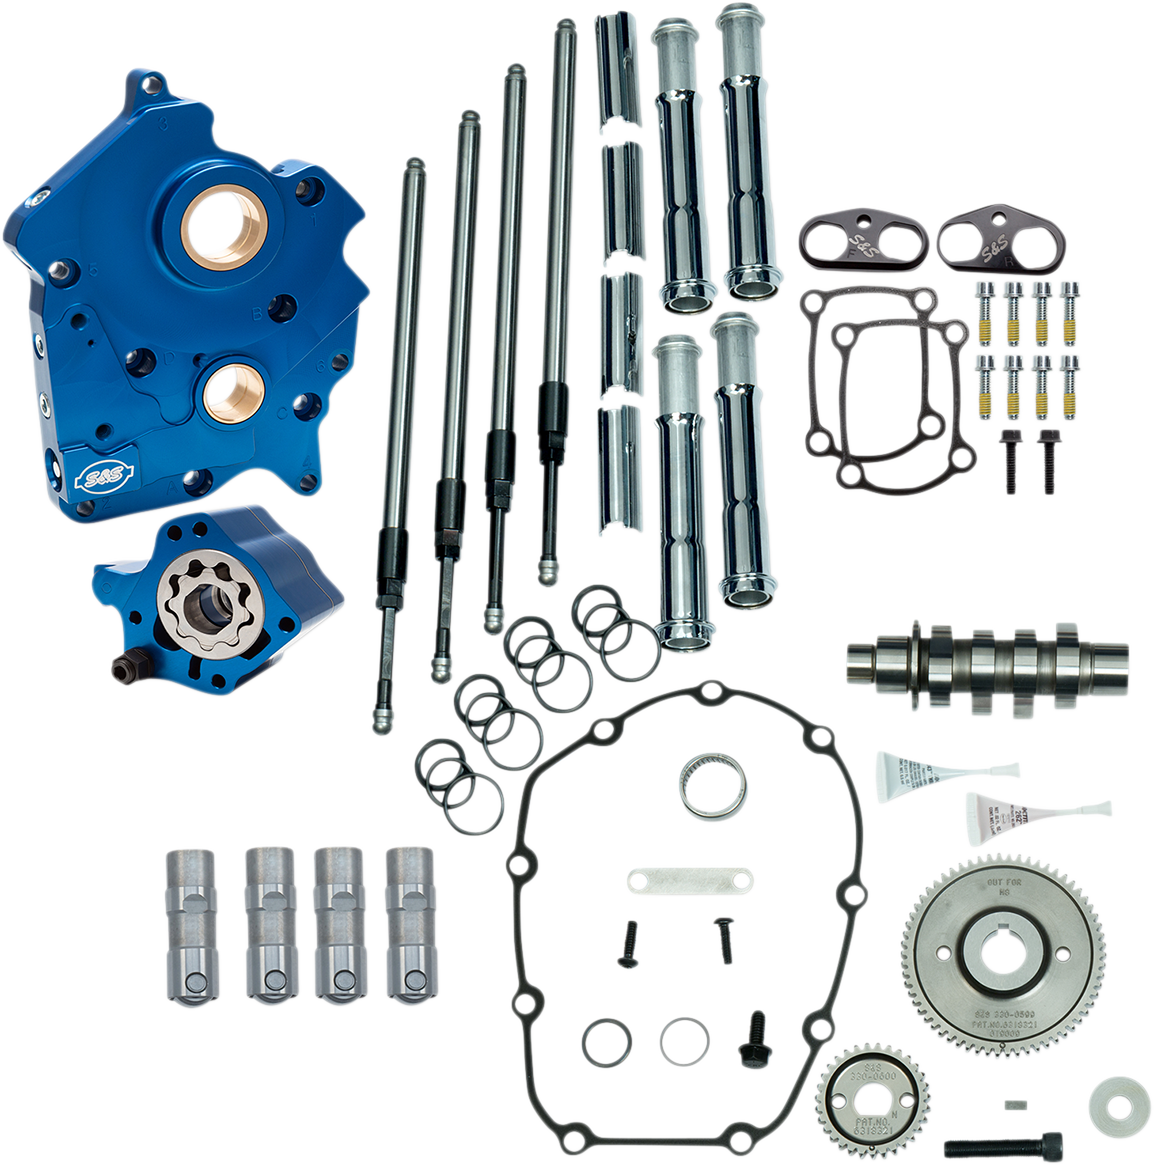 S&S CYCLE Cam Chest Kit with Plate M8 - Gear Drive - Oil Cooled - 465 Cam - Chrome Pushrods 310-1005A